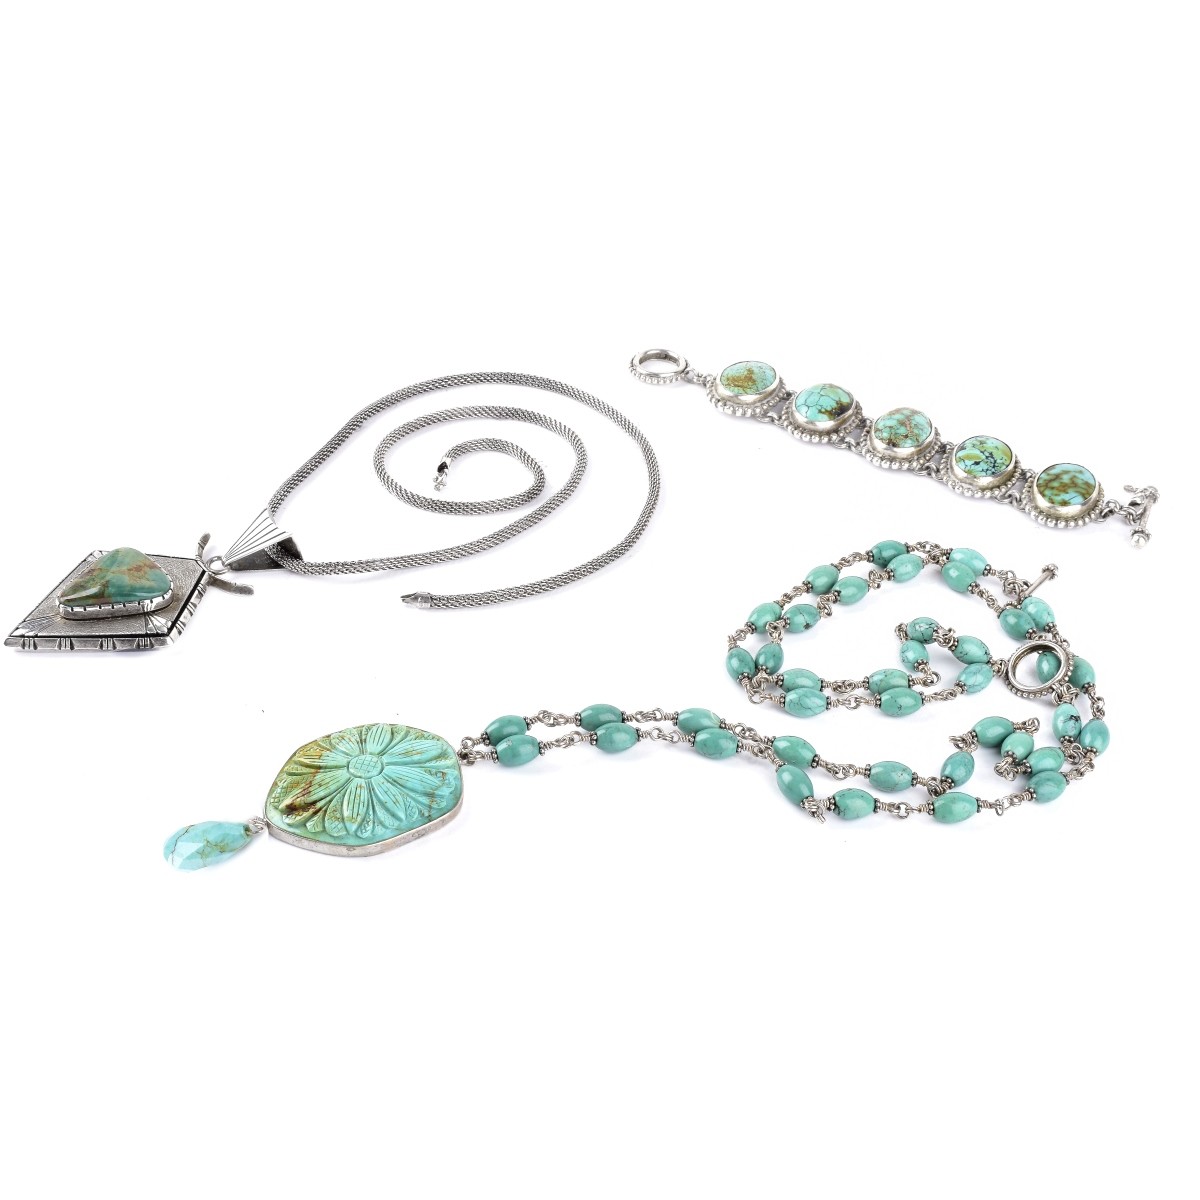 Turquoise and Sterling Jewelry Group